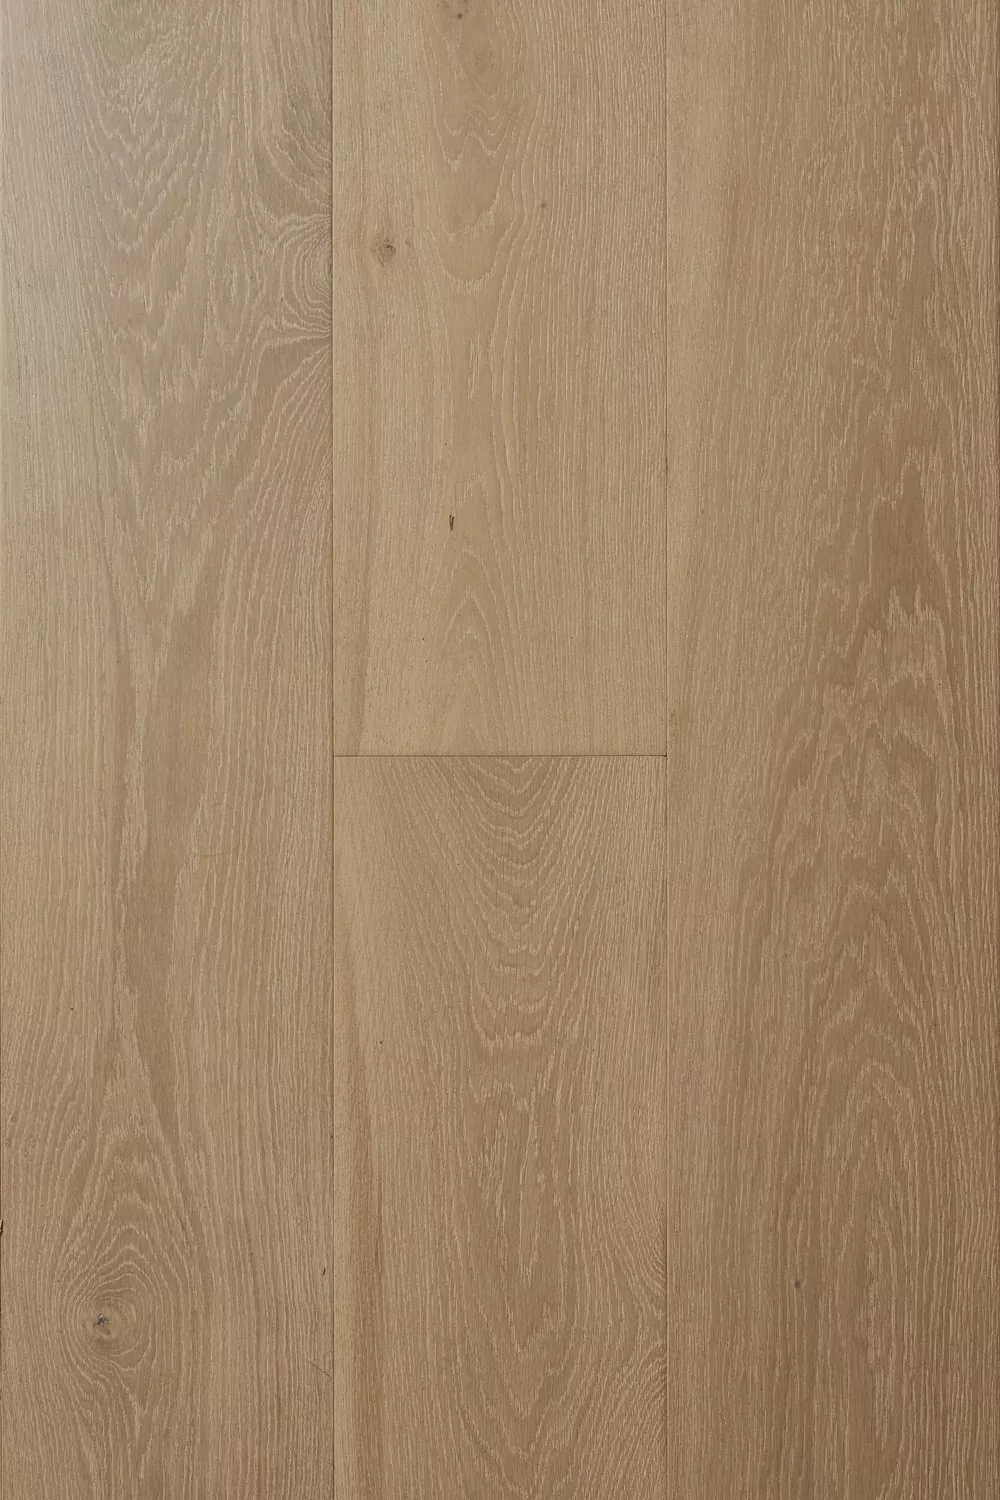 Have the best finishing for your home by
  using oak hardwood flooring